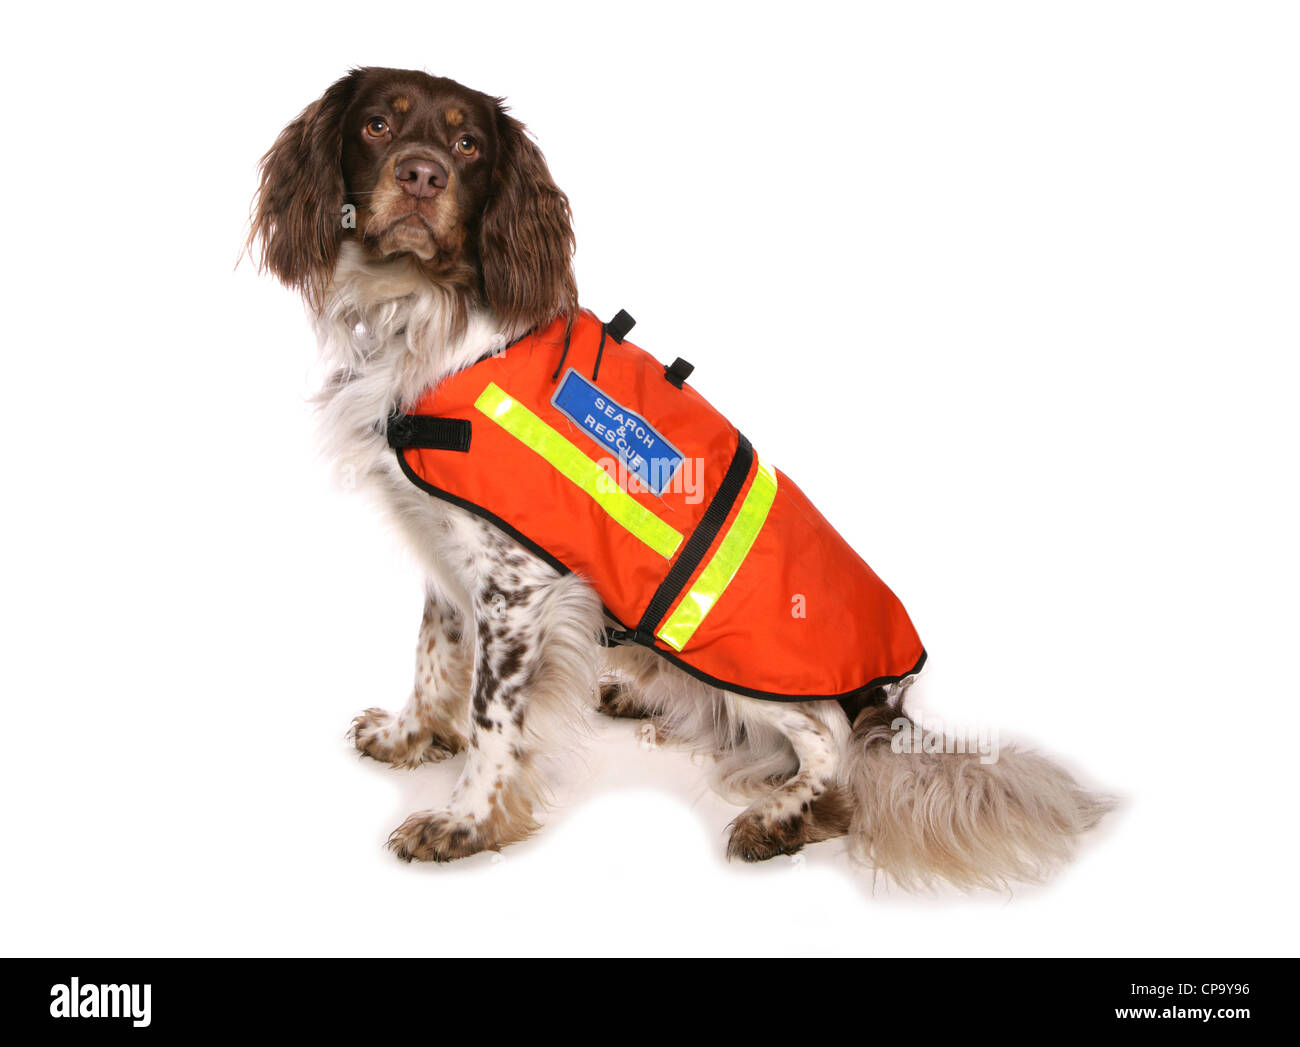 Springer Spaniel Single adult wearing search and rescue high visability jacket Studio, UK Stock Photo